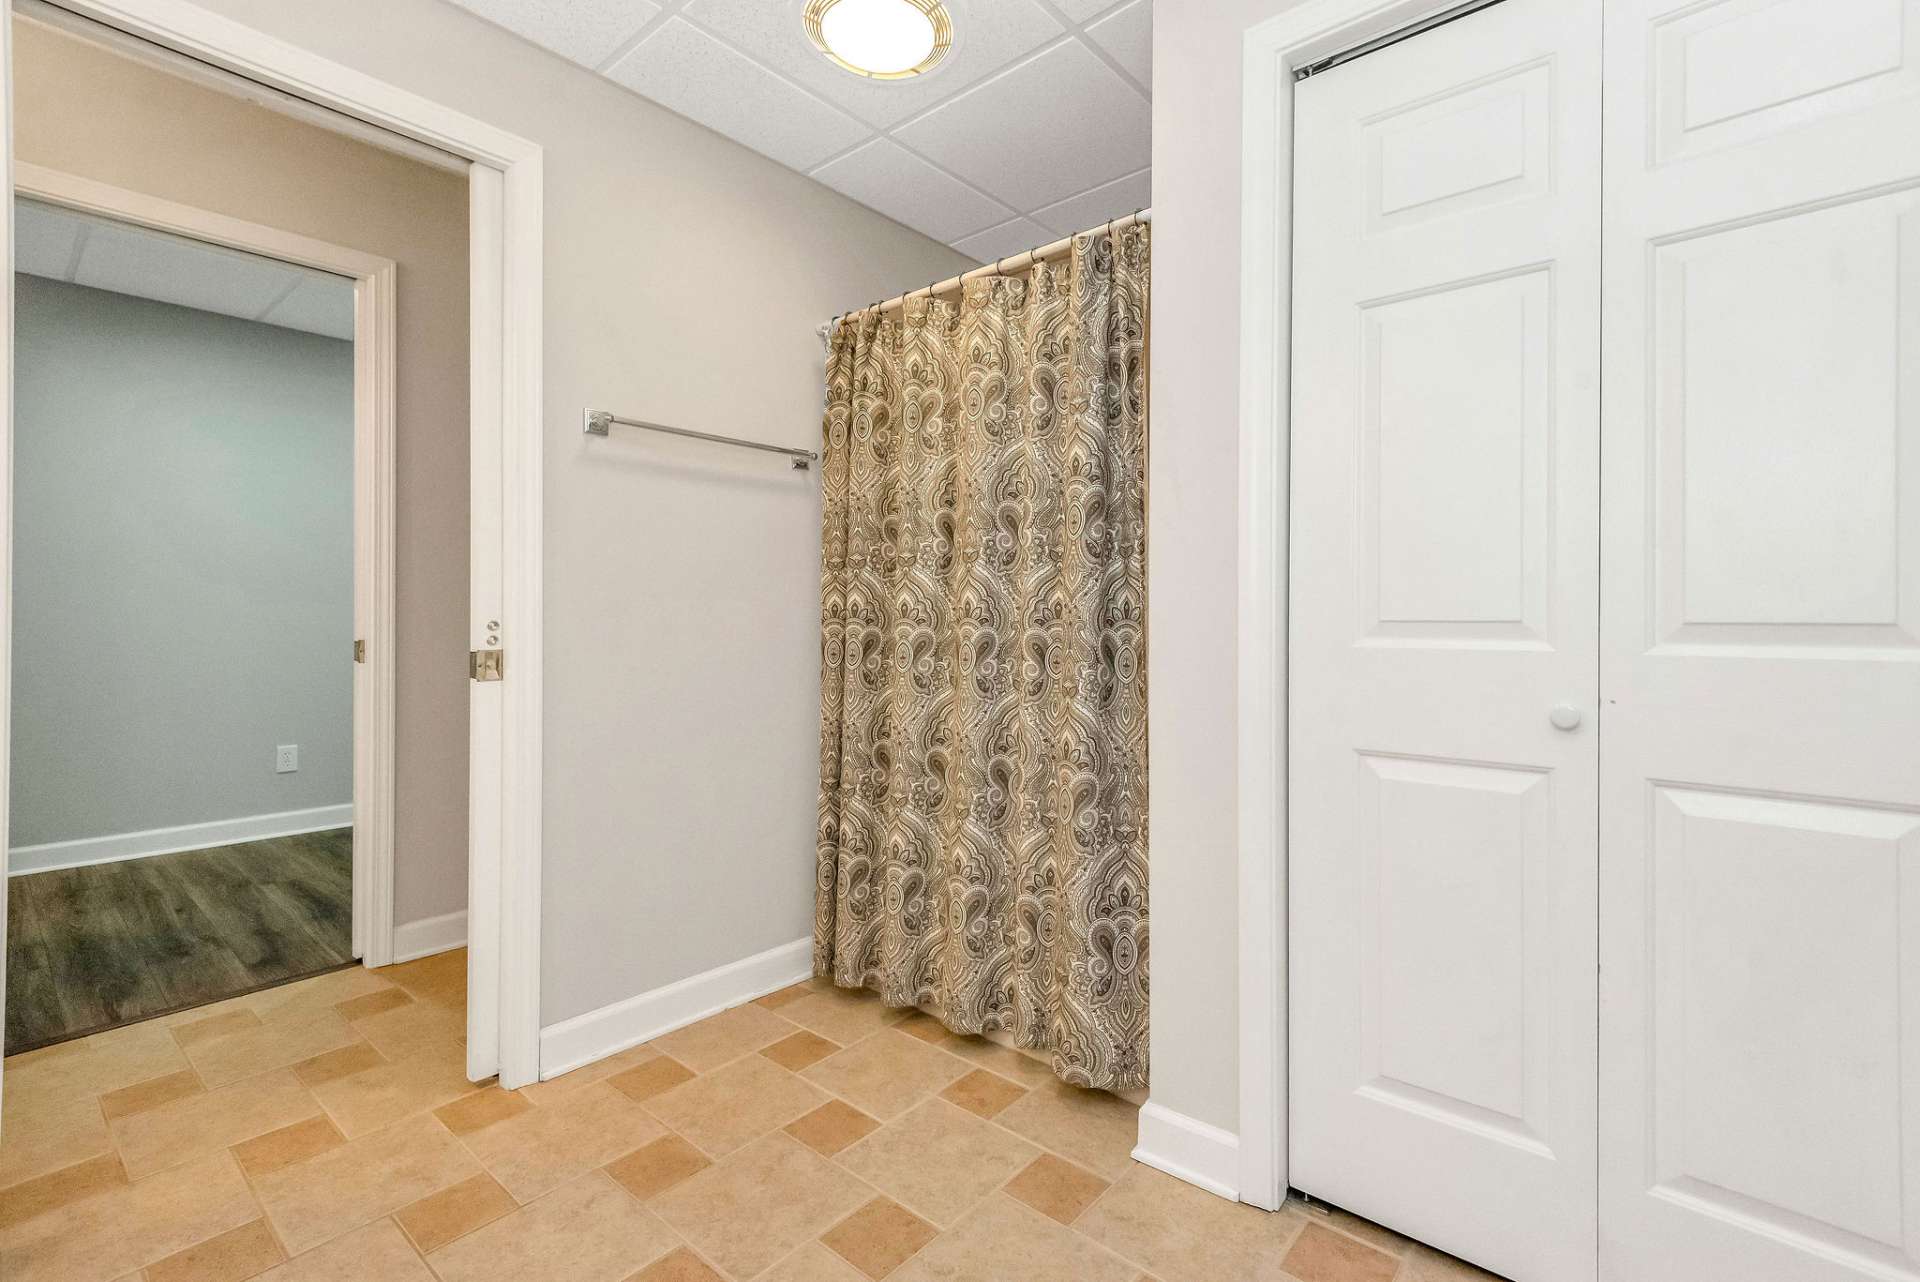 This convenient feature allows for easy transition between the bedroom and the bath, providing residents with privacy when needed while also ensuring accessibility and convenience for guests.